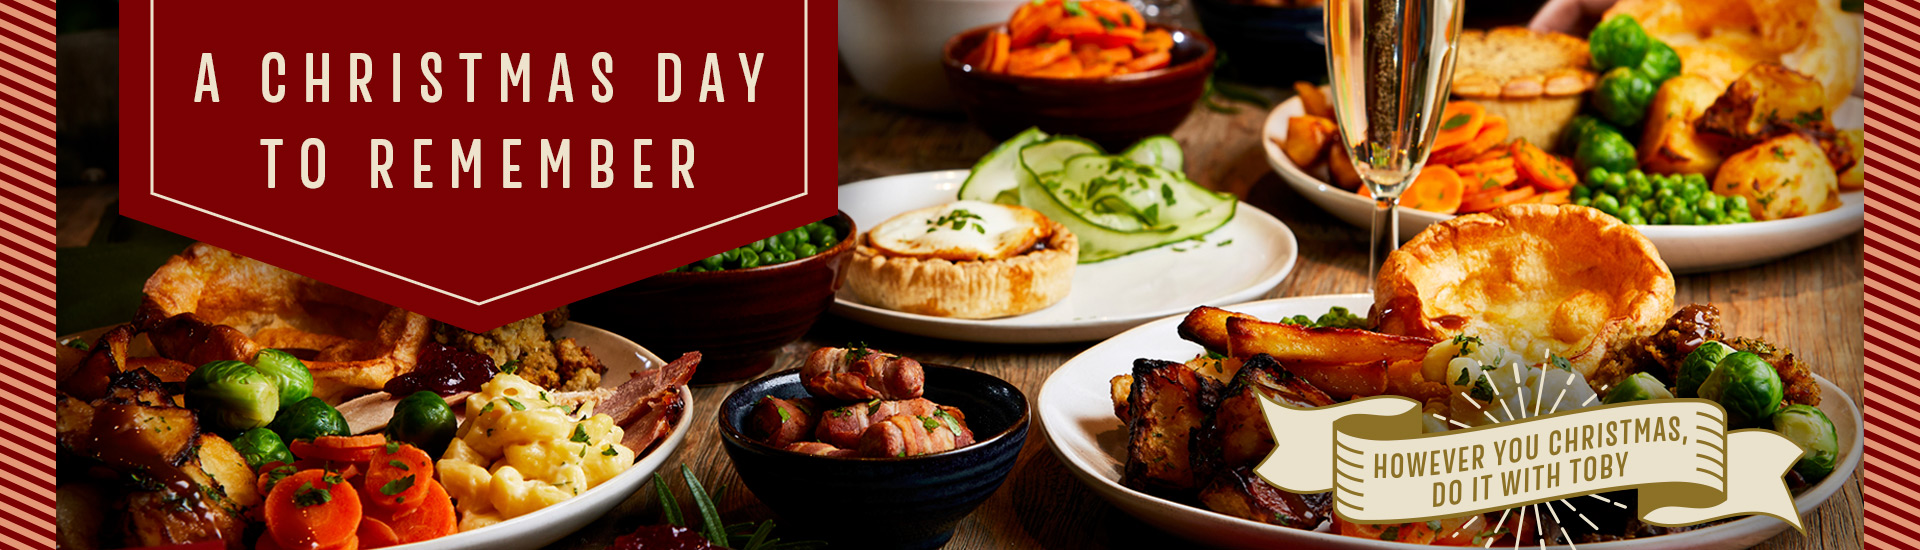 Christmas Day menu at Toby Carvery Chelmsford